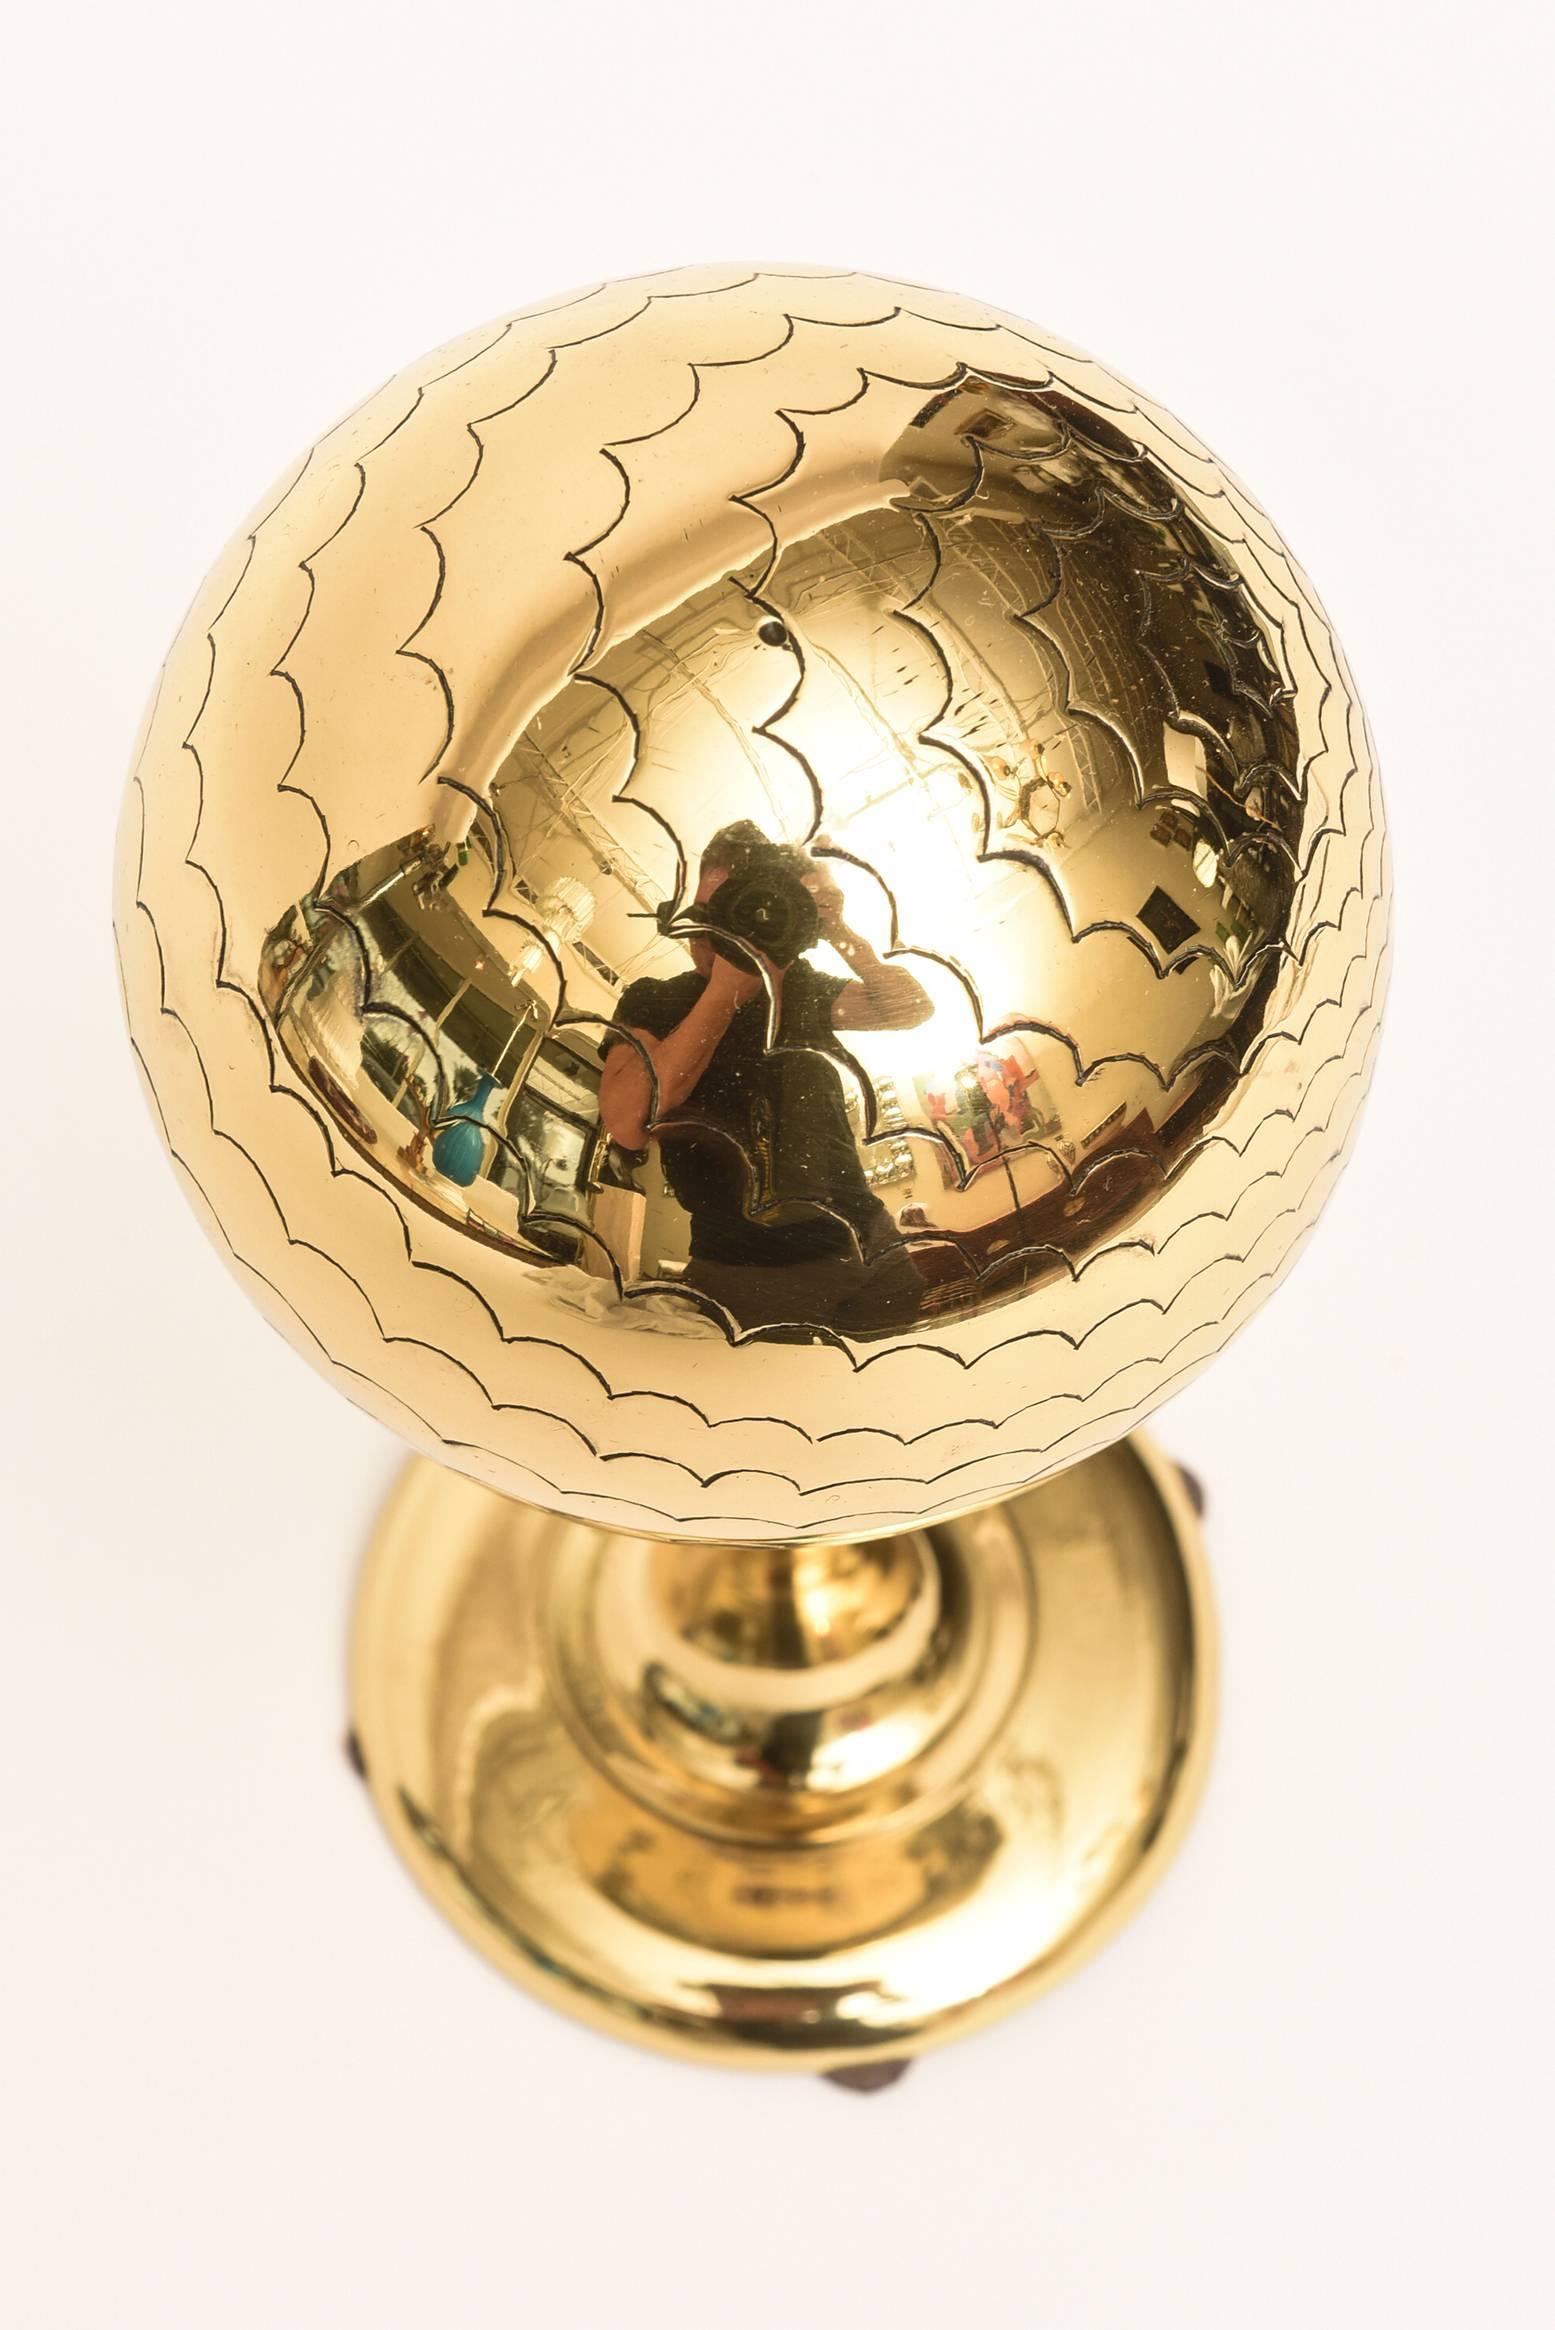 This Mid-Century Modern desk accessory or cocktail table sculpture is a solid brass polished globe like object with scalloped designs on the top. This is very well made from the time period and has good weight to it. It is from then 1950s.
  